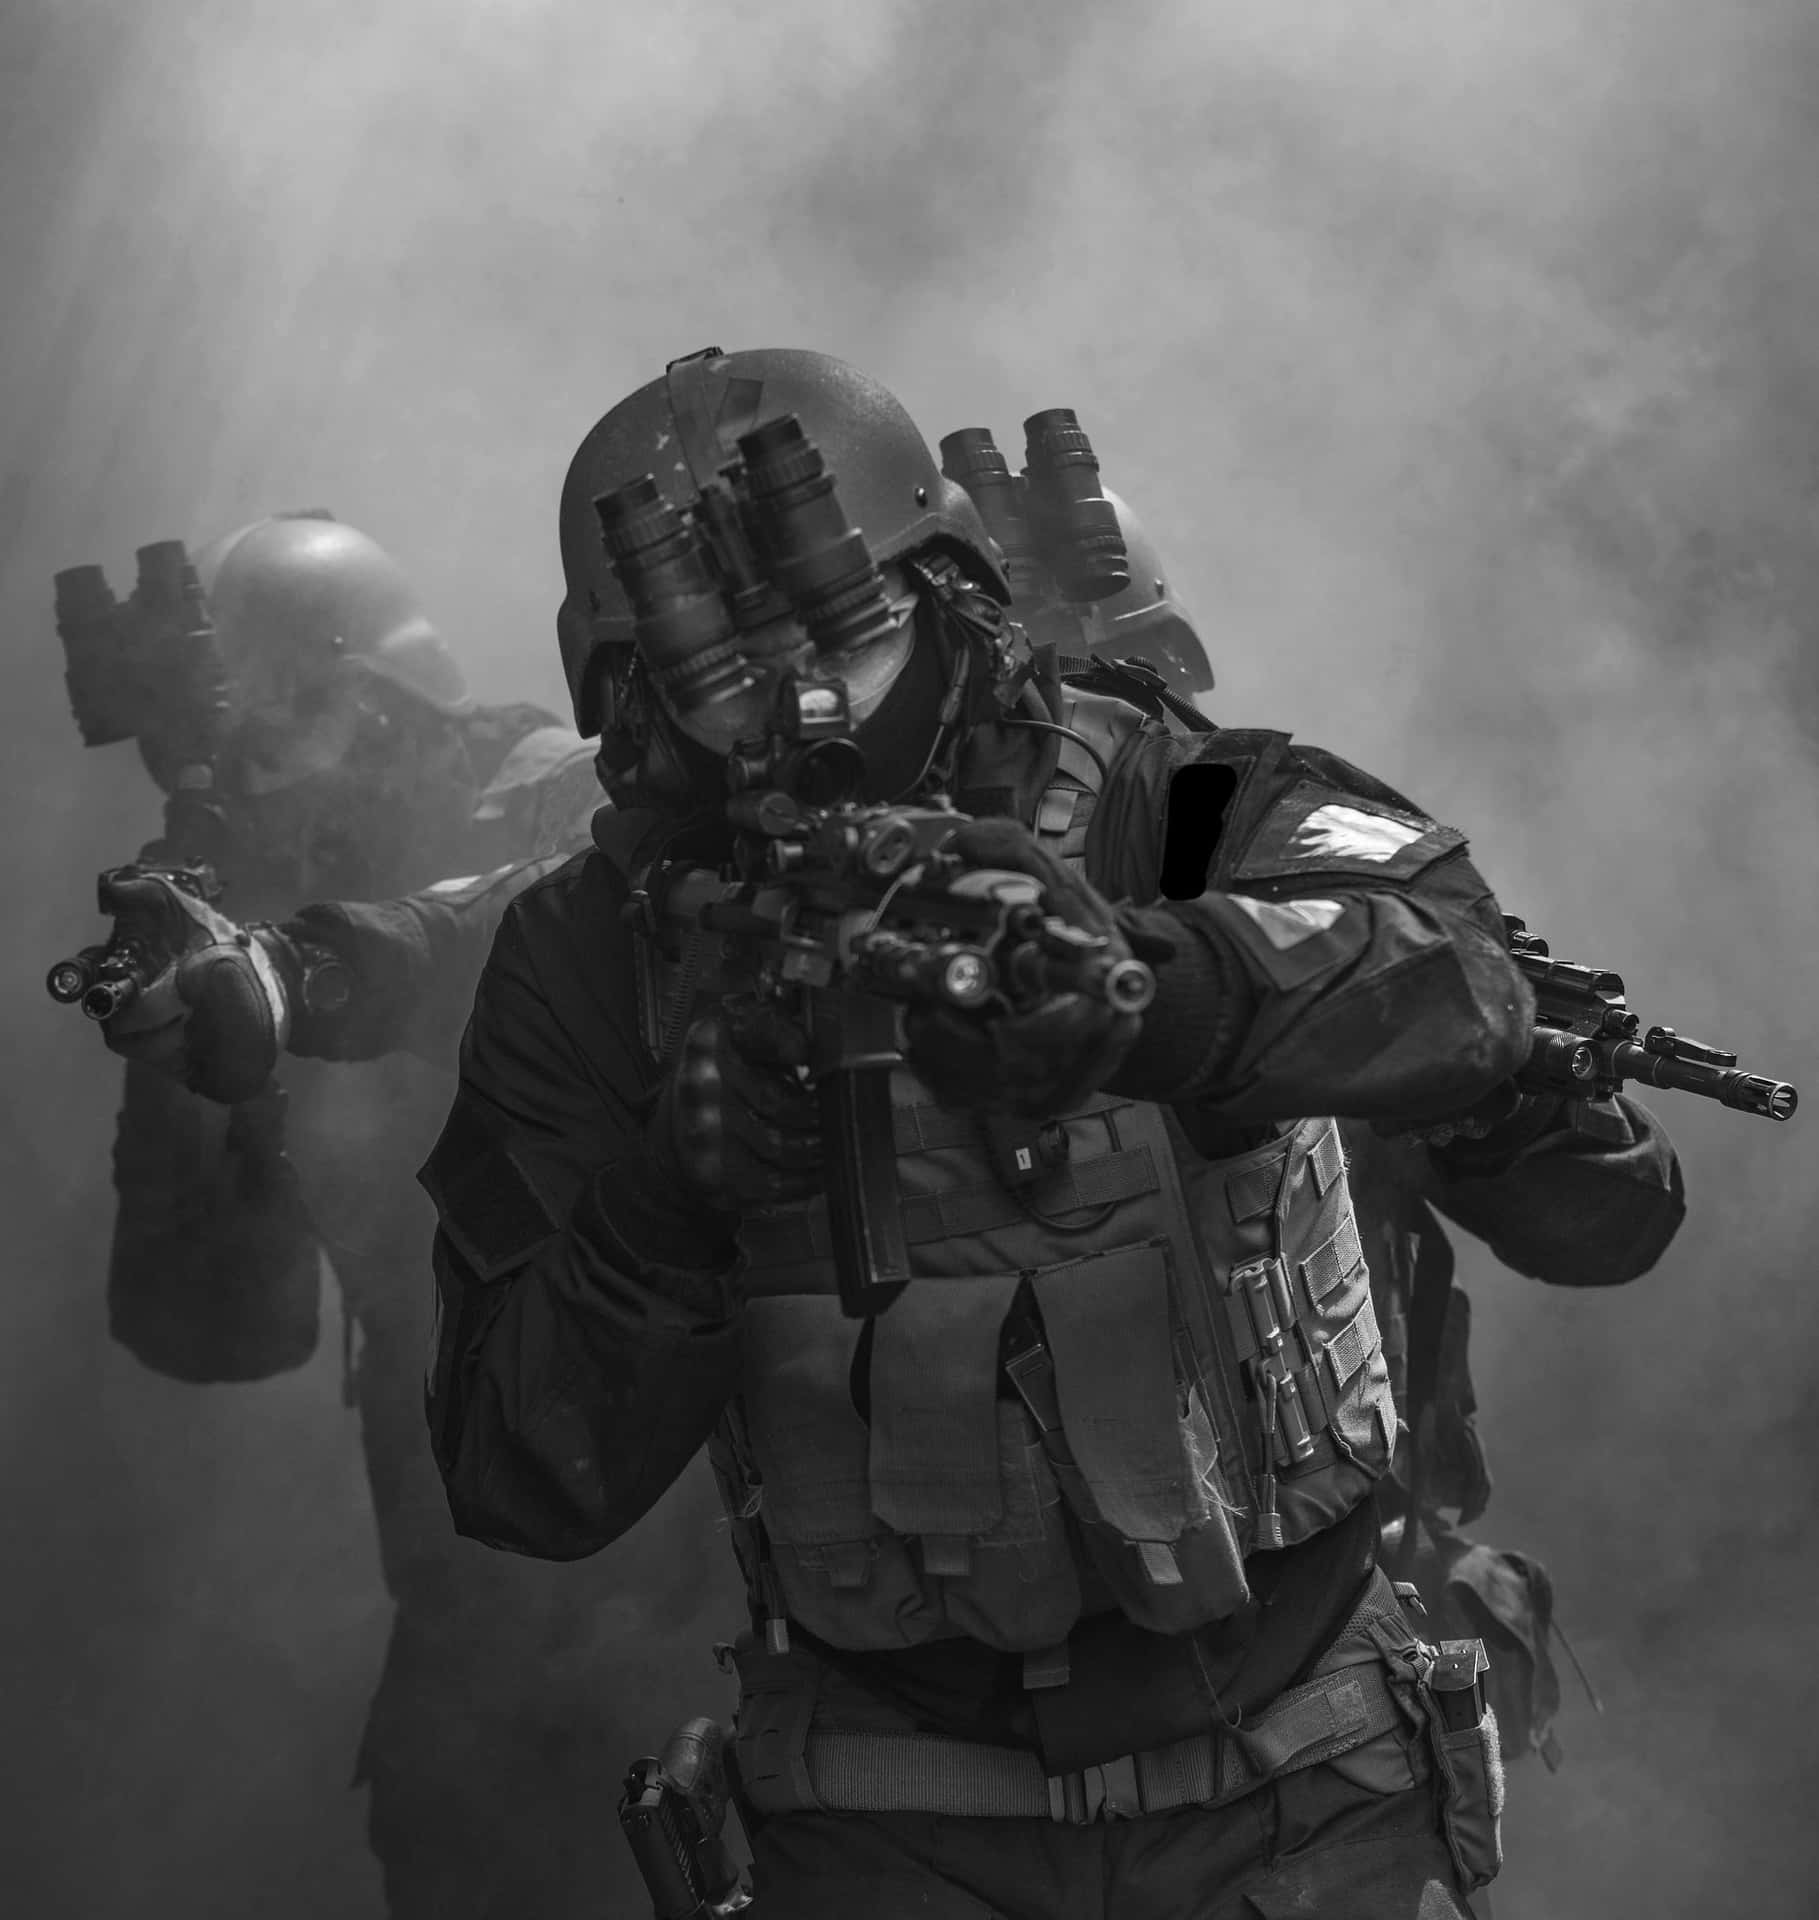 Special_ Operations_ Team_in_ Action Wallpaper